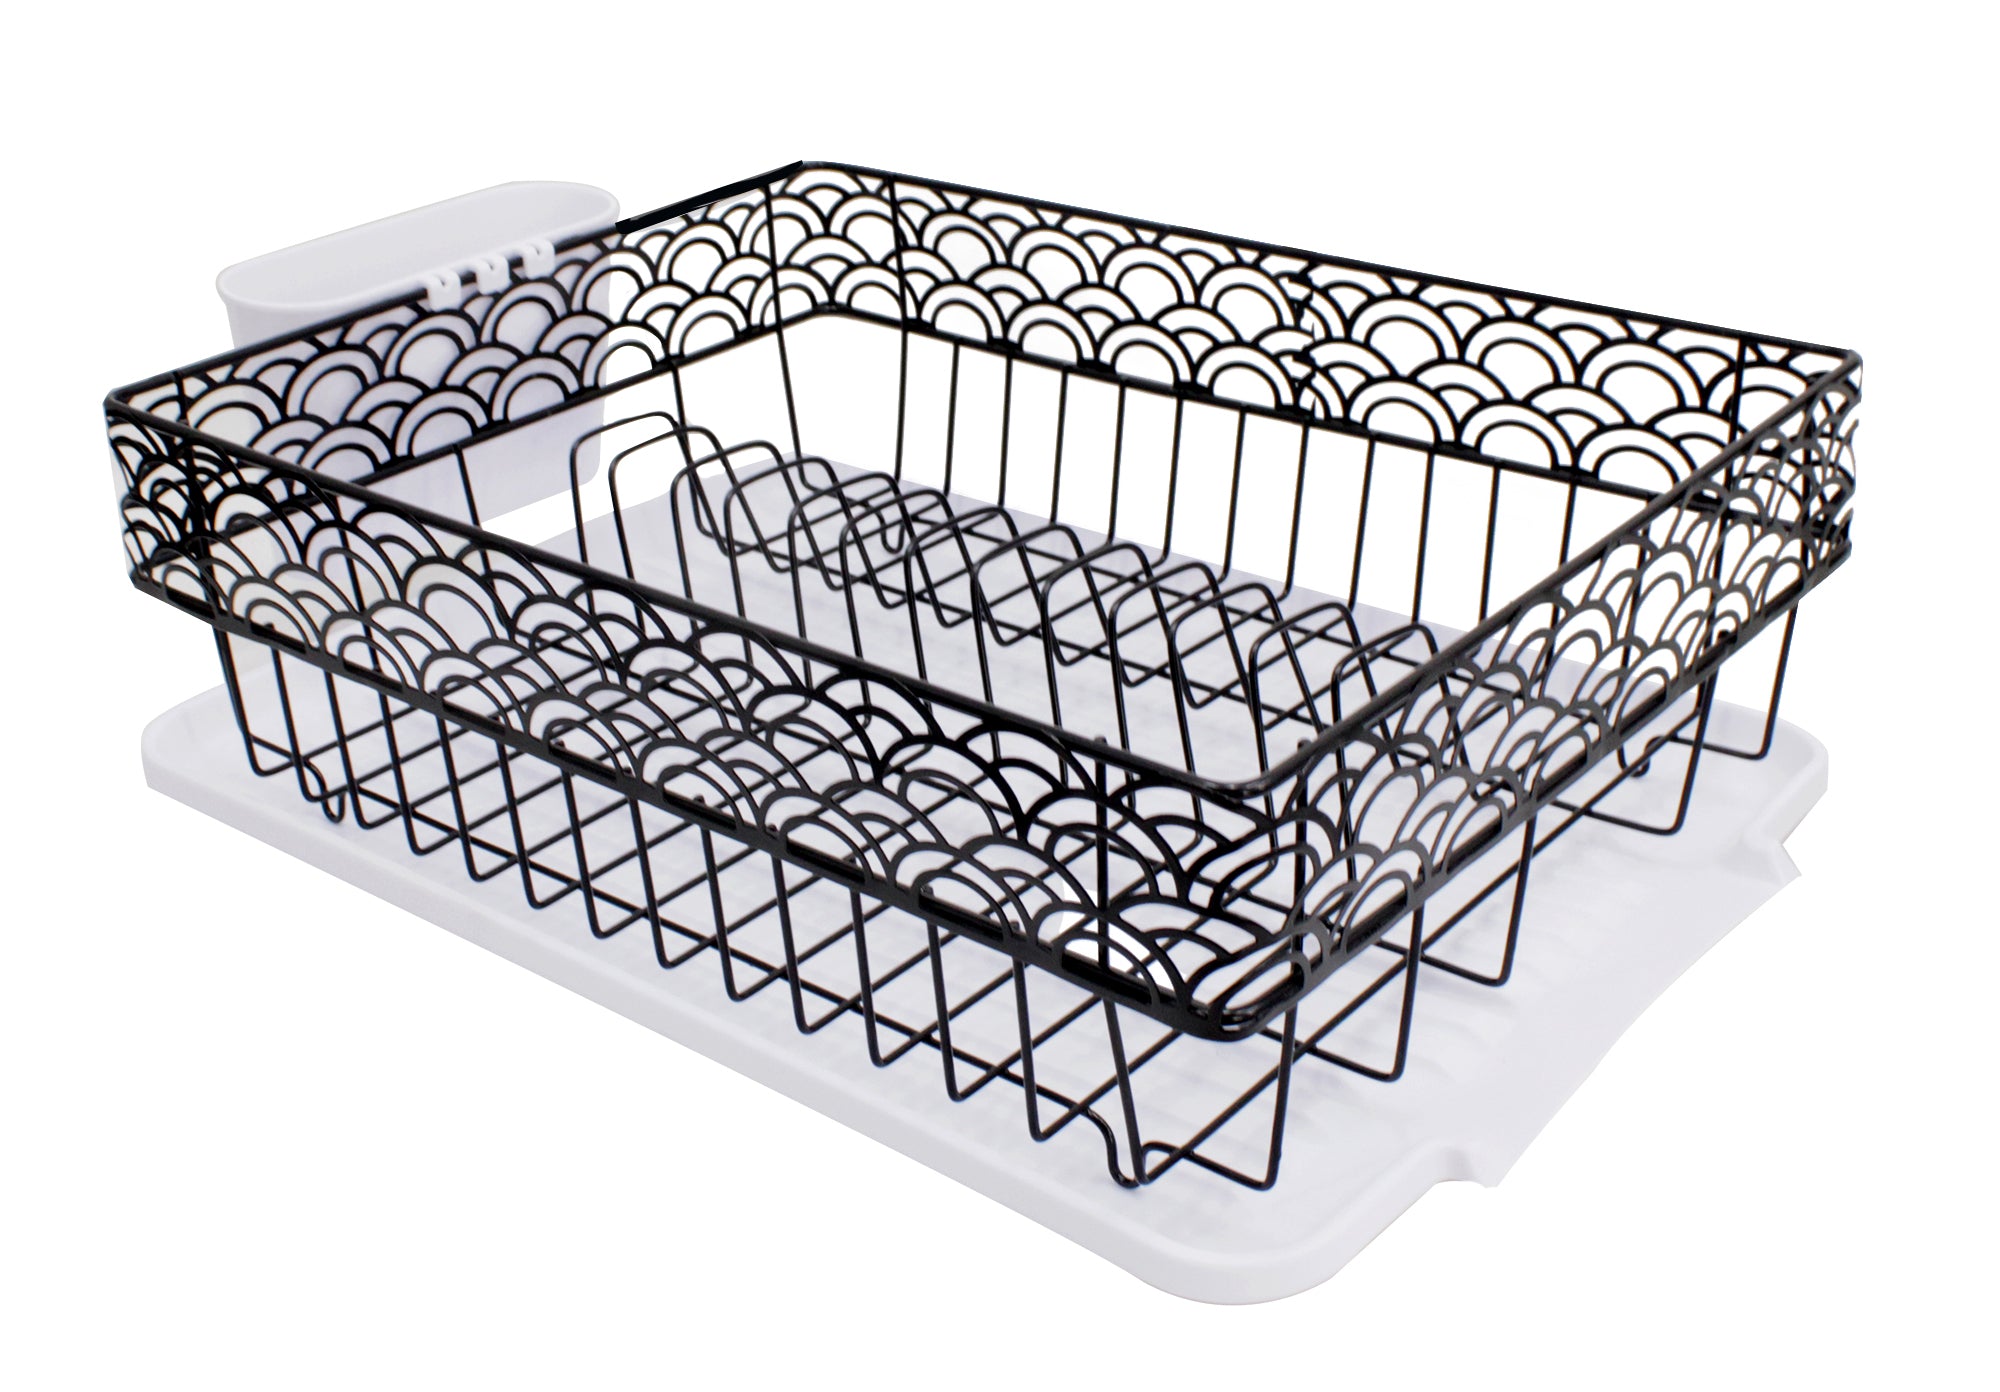 40cm x 30cm Arches Dish Draining with Cutlery Holder & Drip Tray 40 x 30 x10 cm Arches Dish Draining with Cutlery Holder & Drip Tray